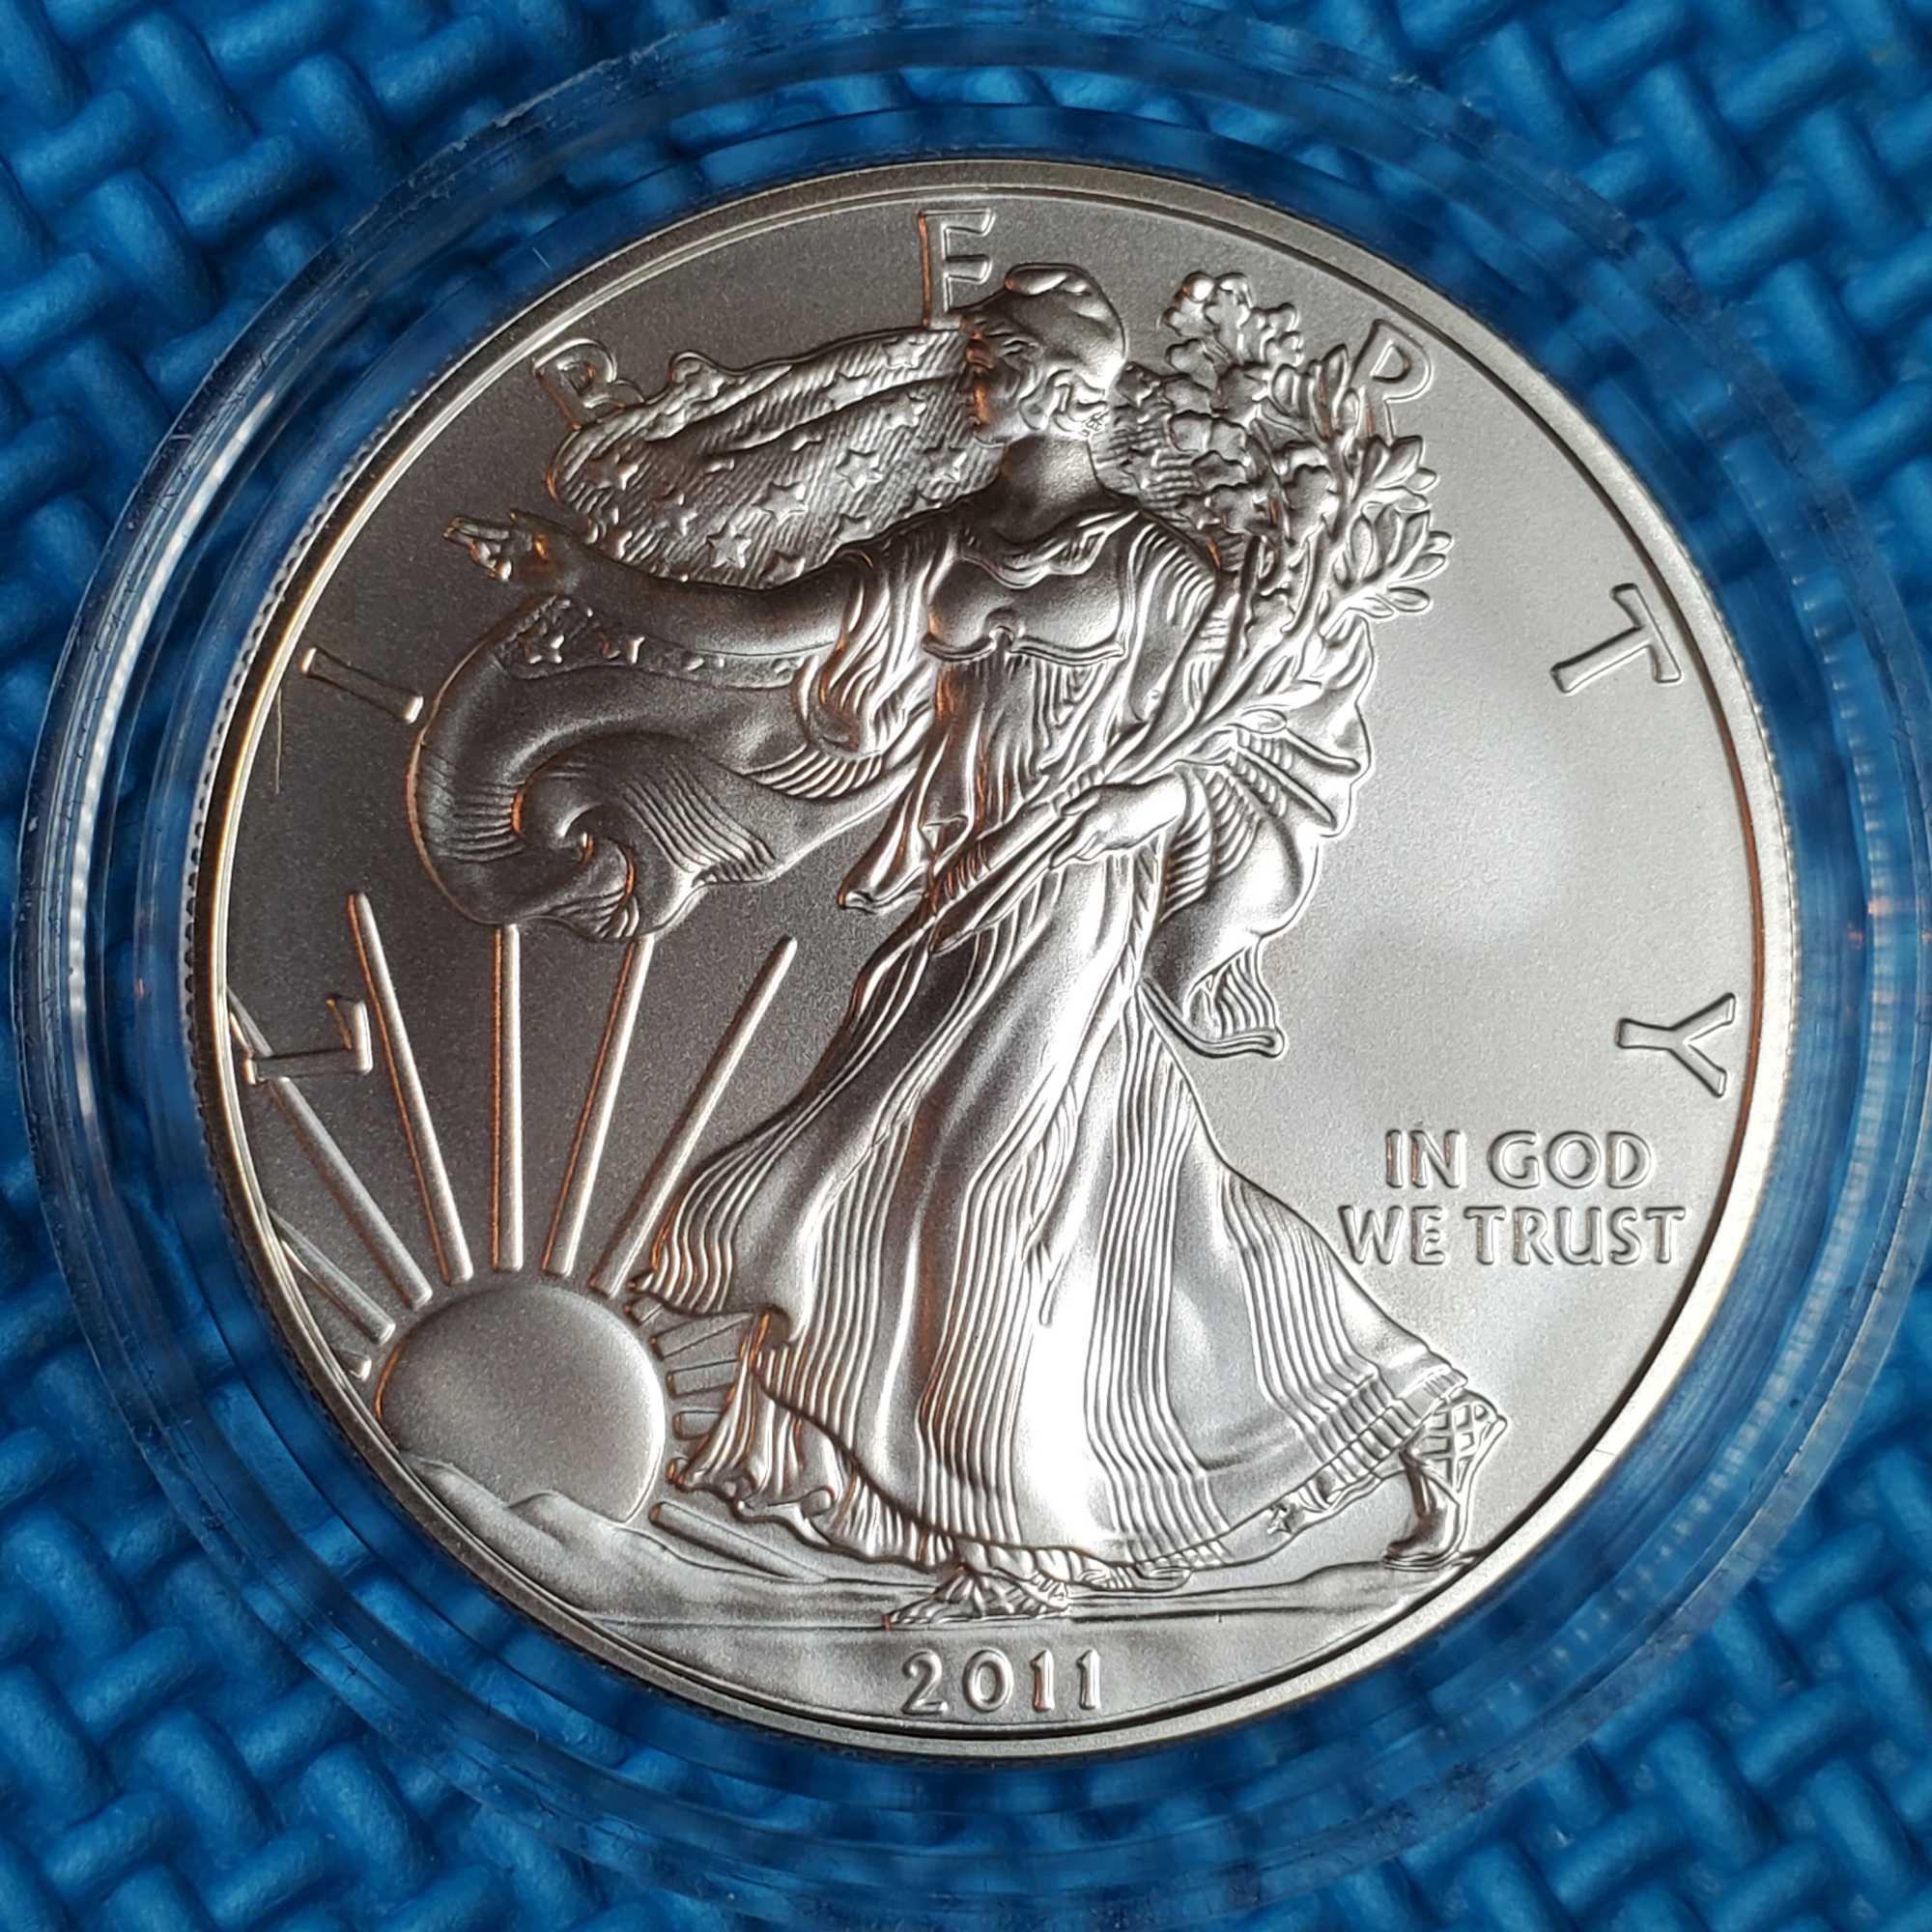 US Mint Special Set of all 5 Types 2011 .999 Silver 1 troy oz American Eagles in Fancy Display Box